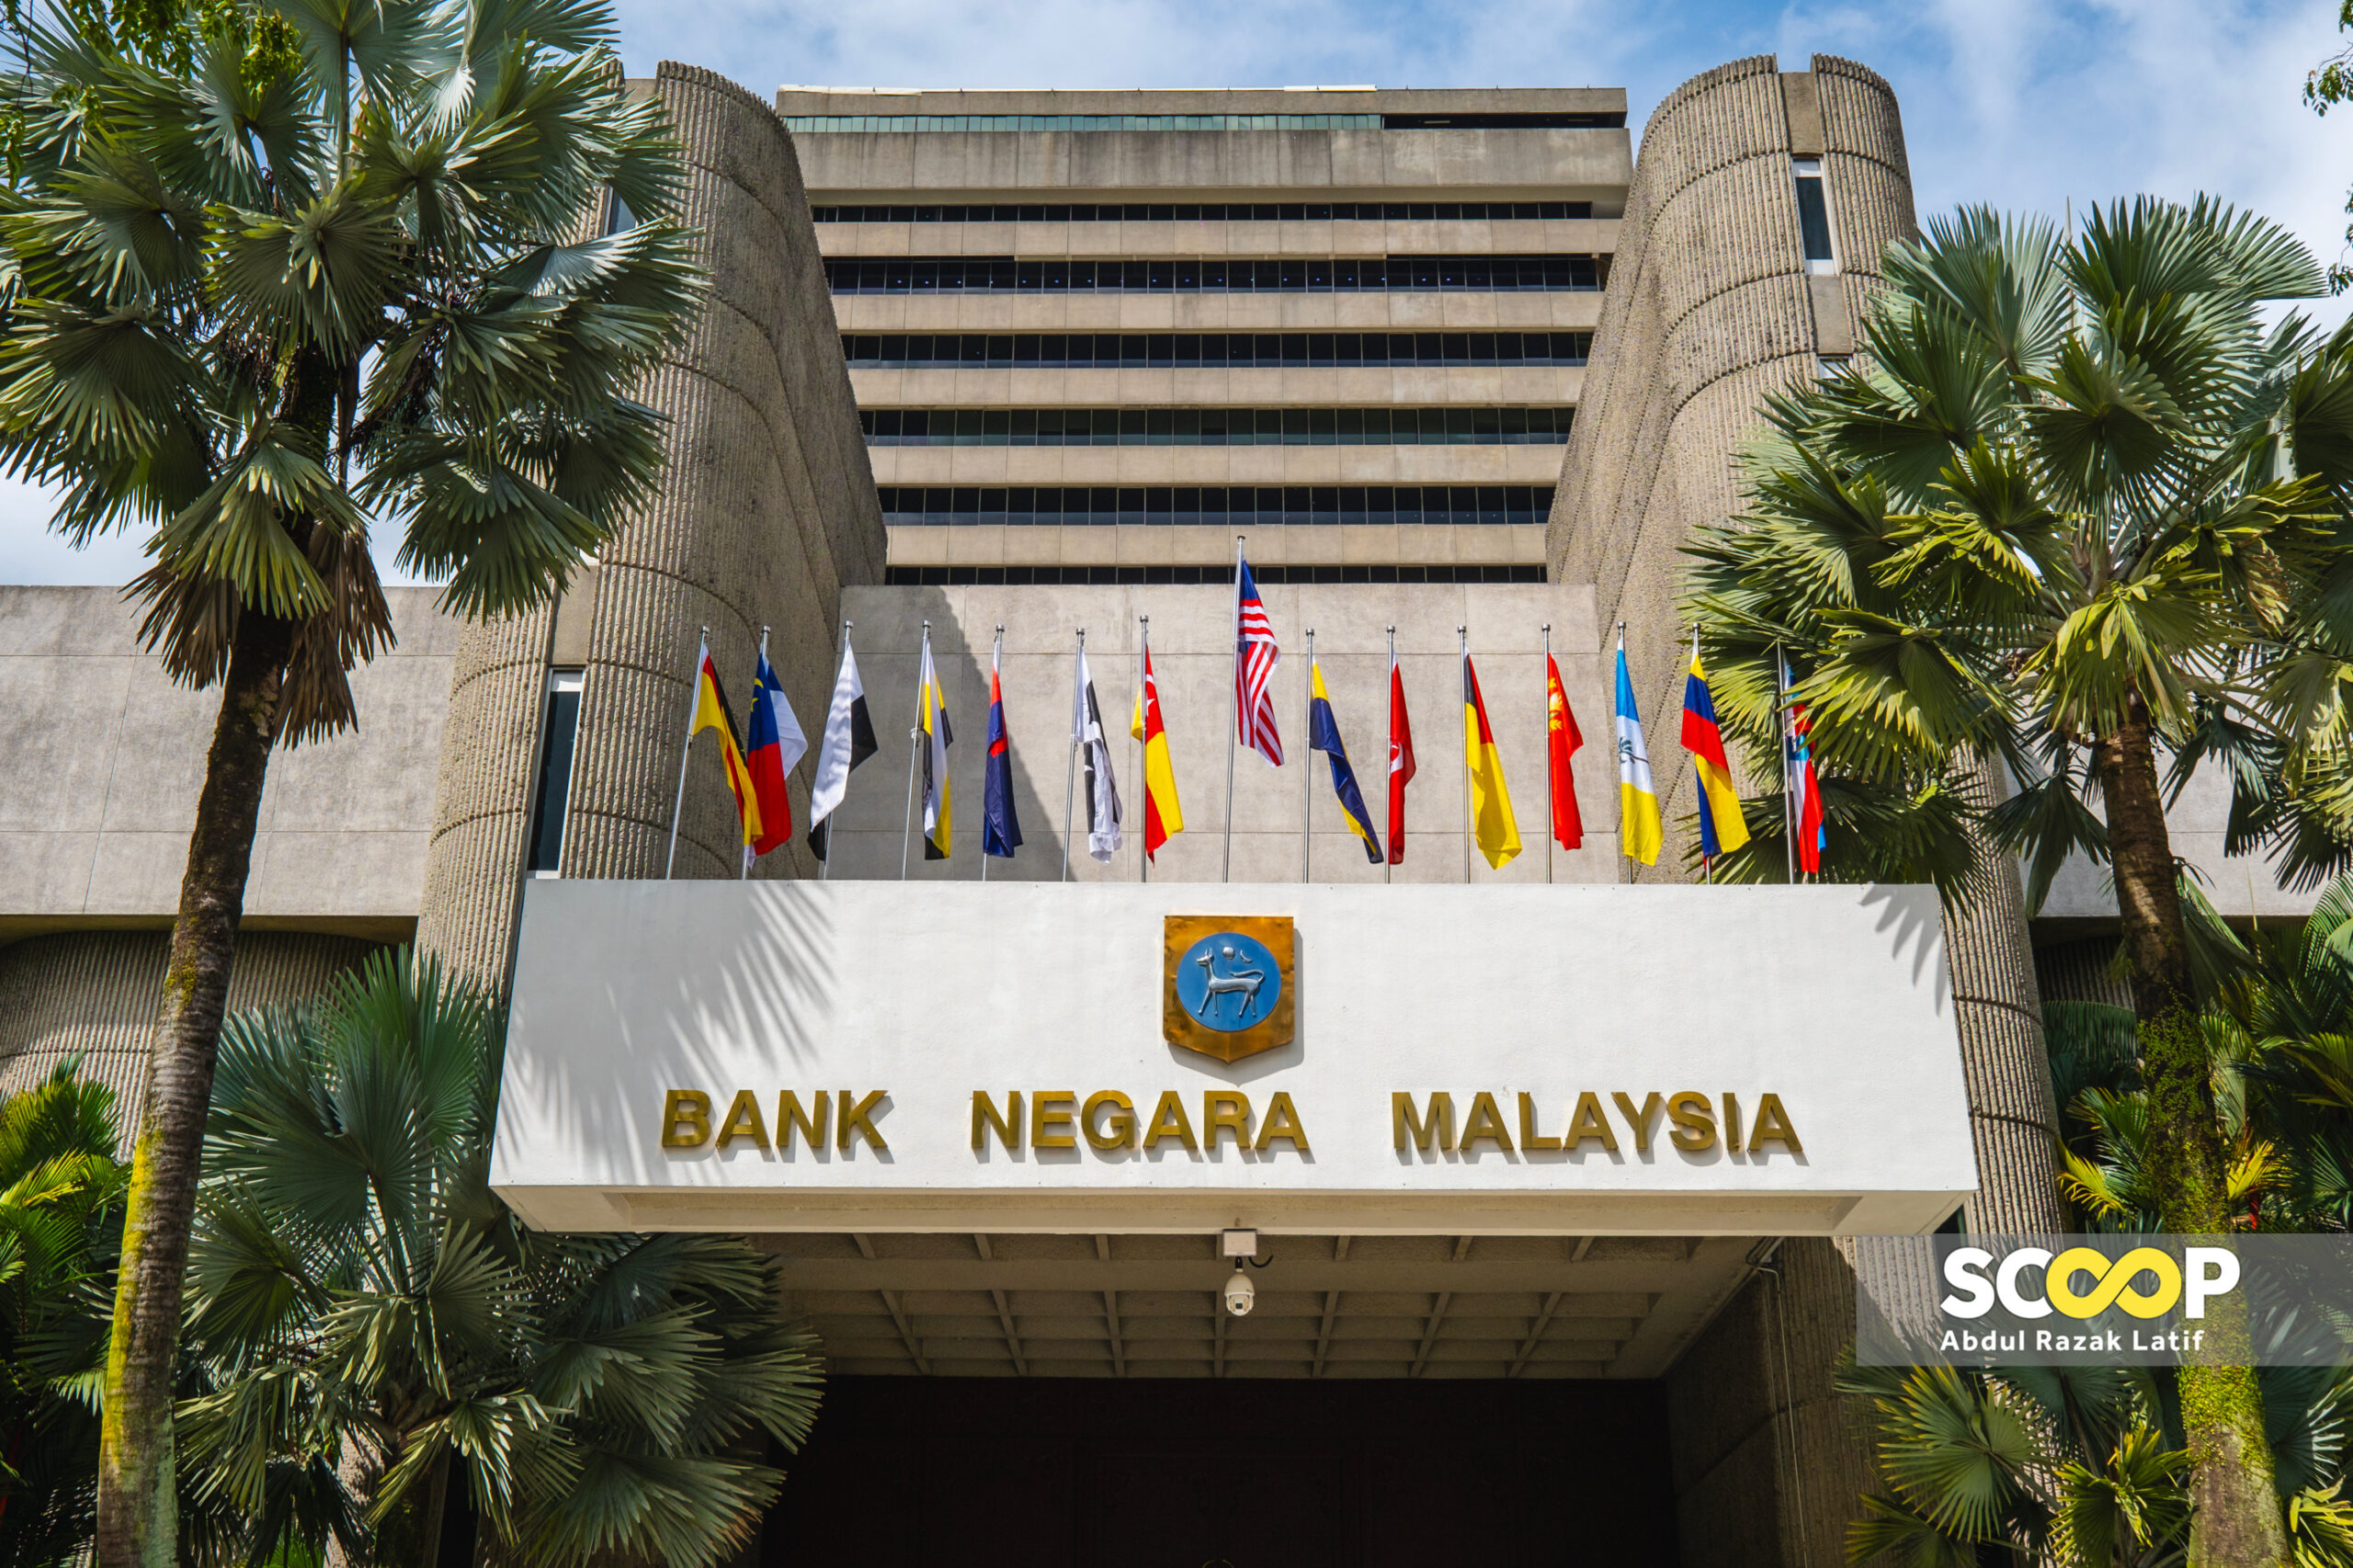 Google published inaccurate USD/RM exchange rate, again: BNM